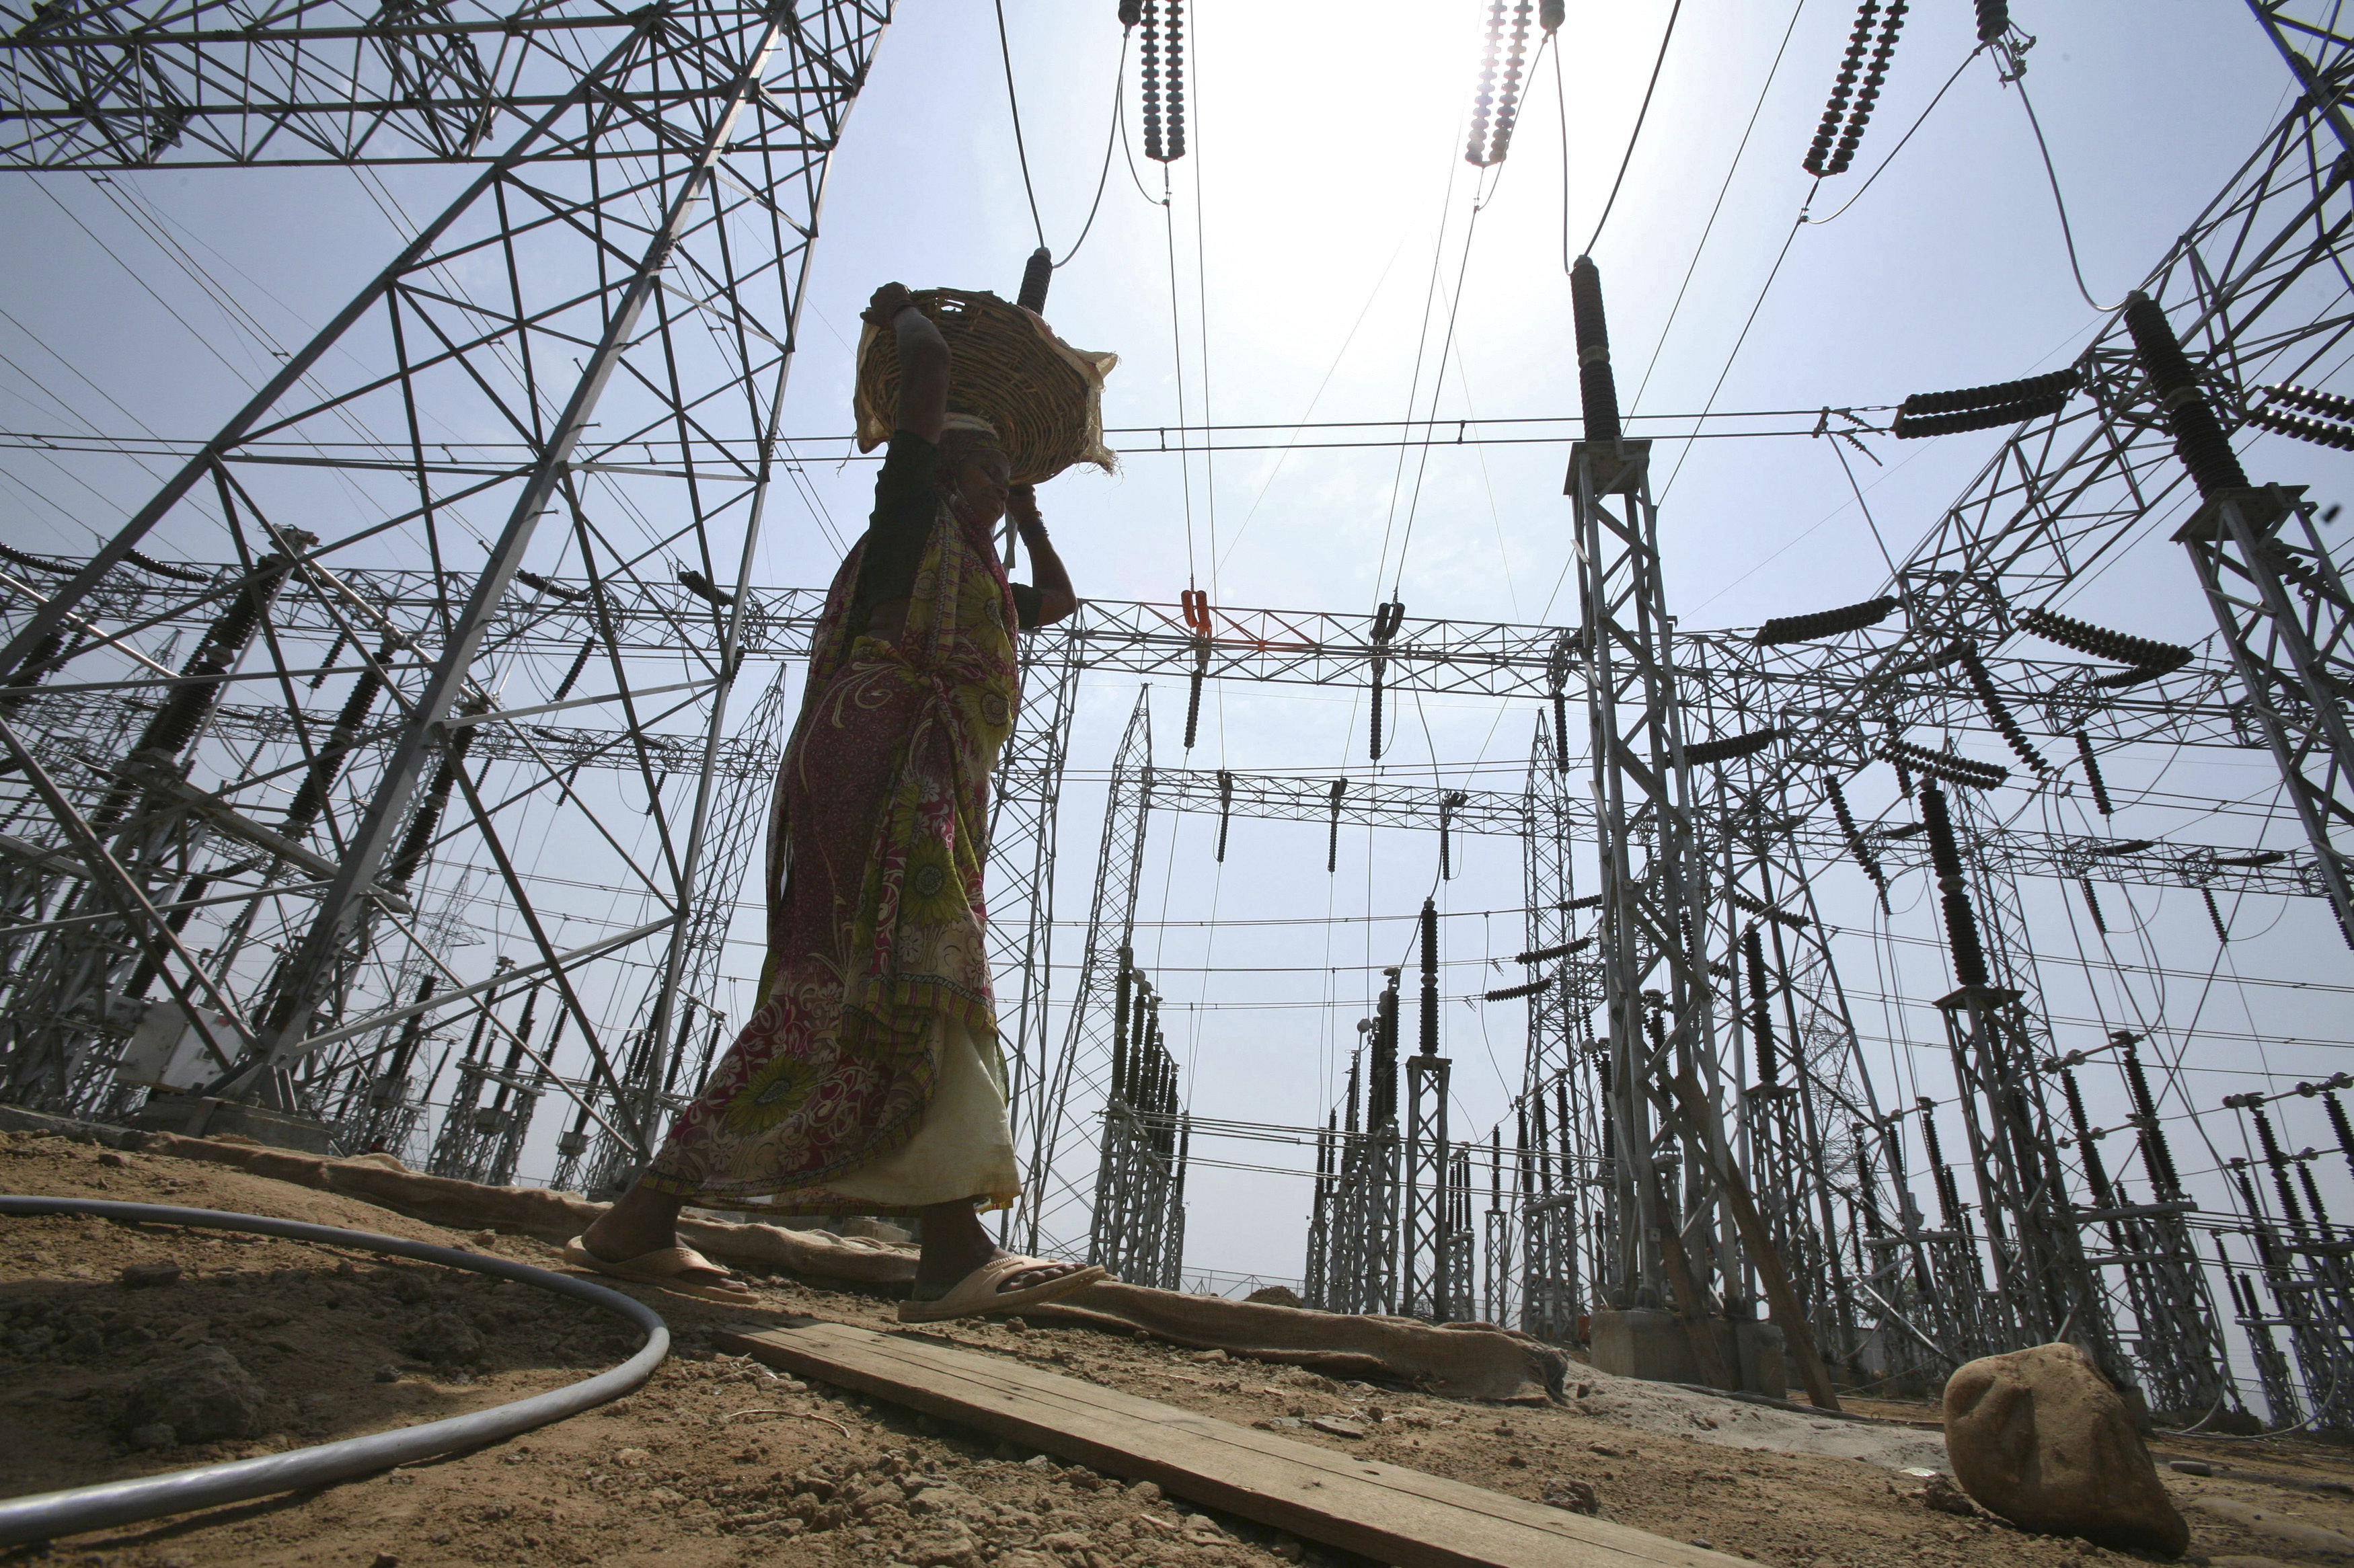 A labourer works at the construction site of a grid power station in Jammu